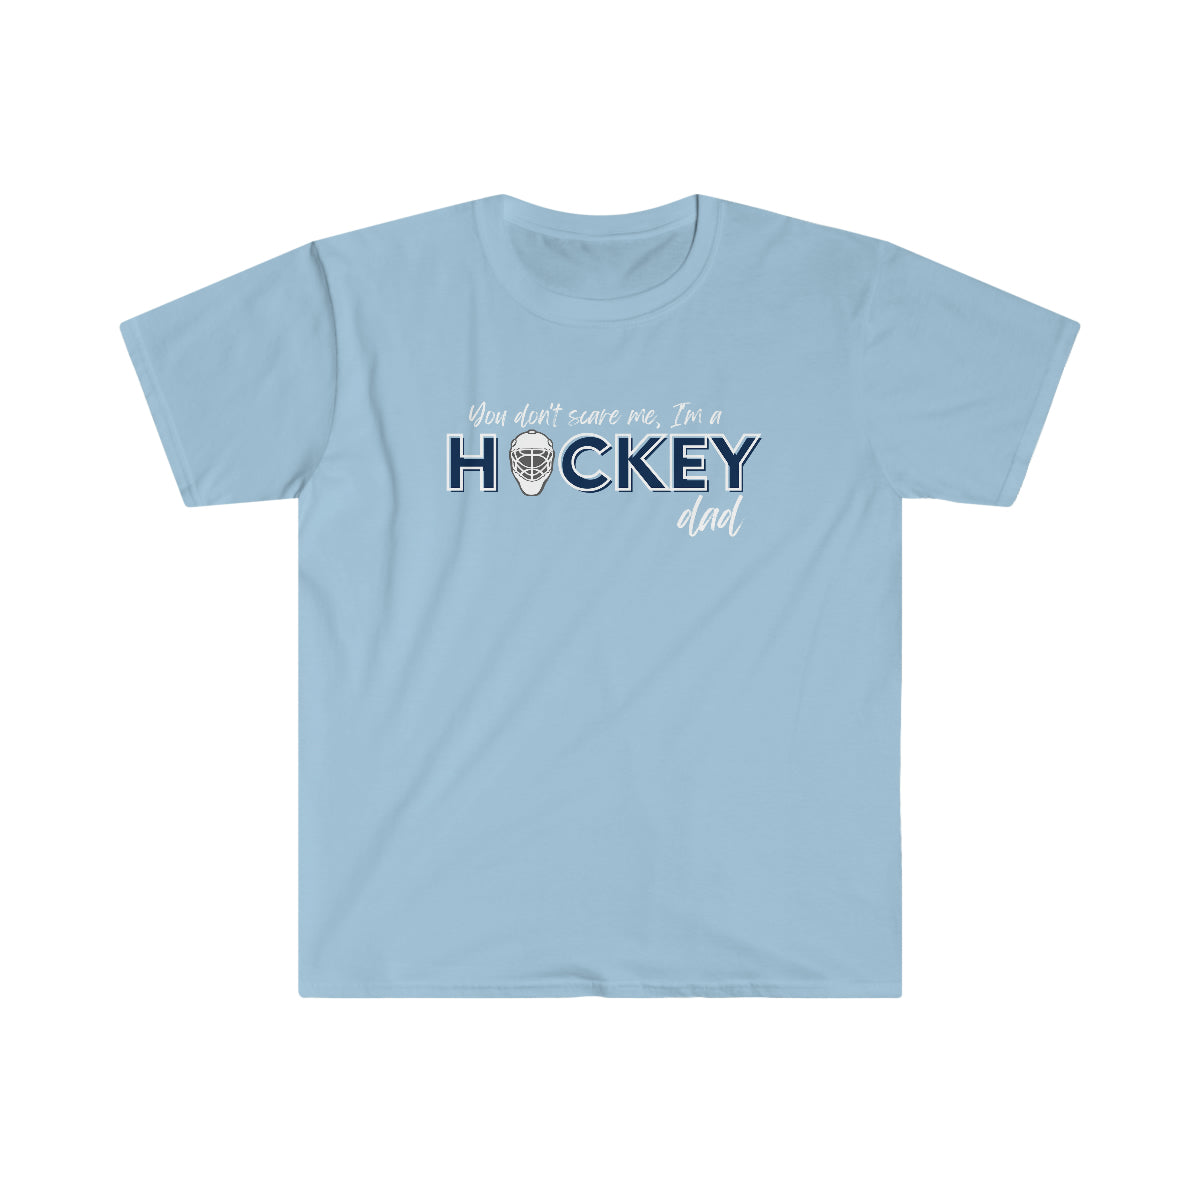 You don't scare me, I'm a Hockey Dad - Men's Tee